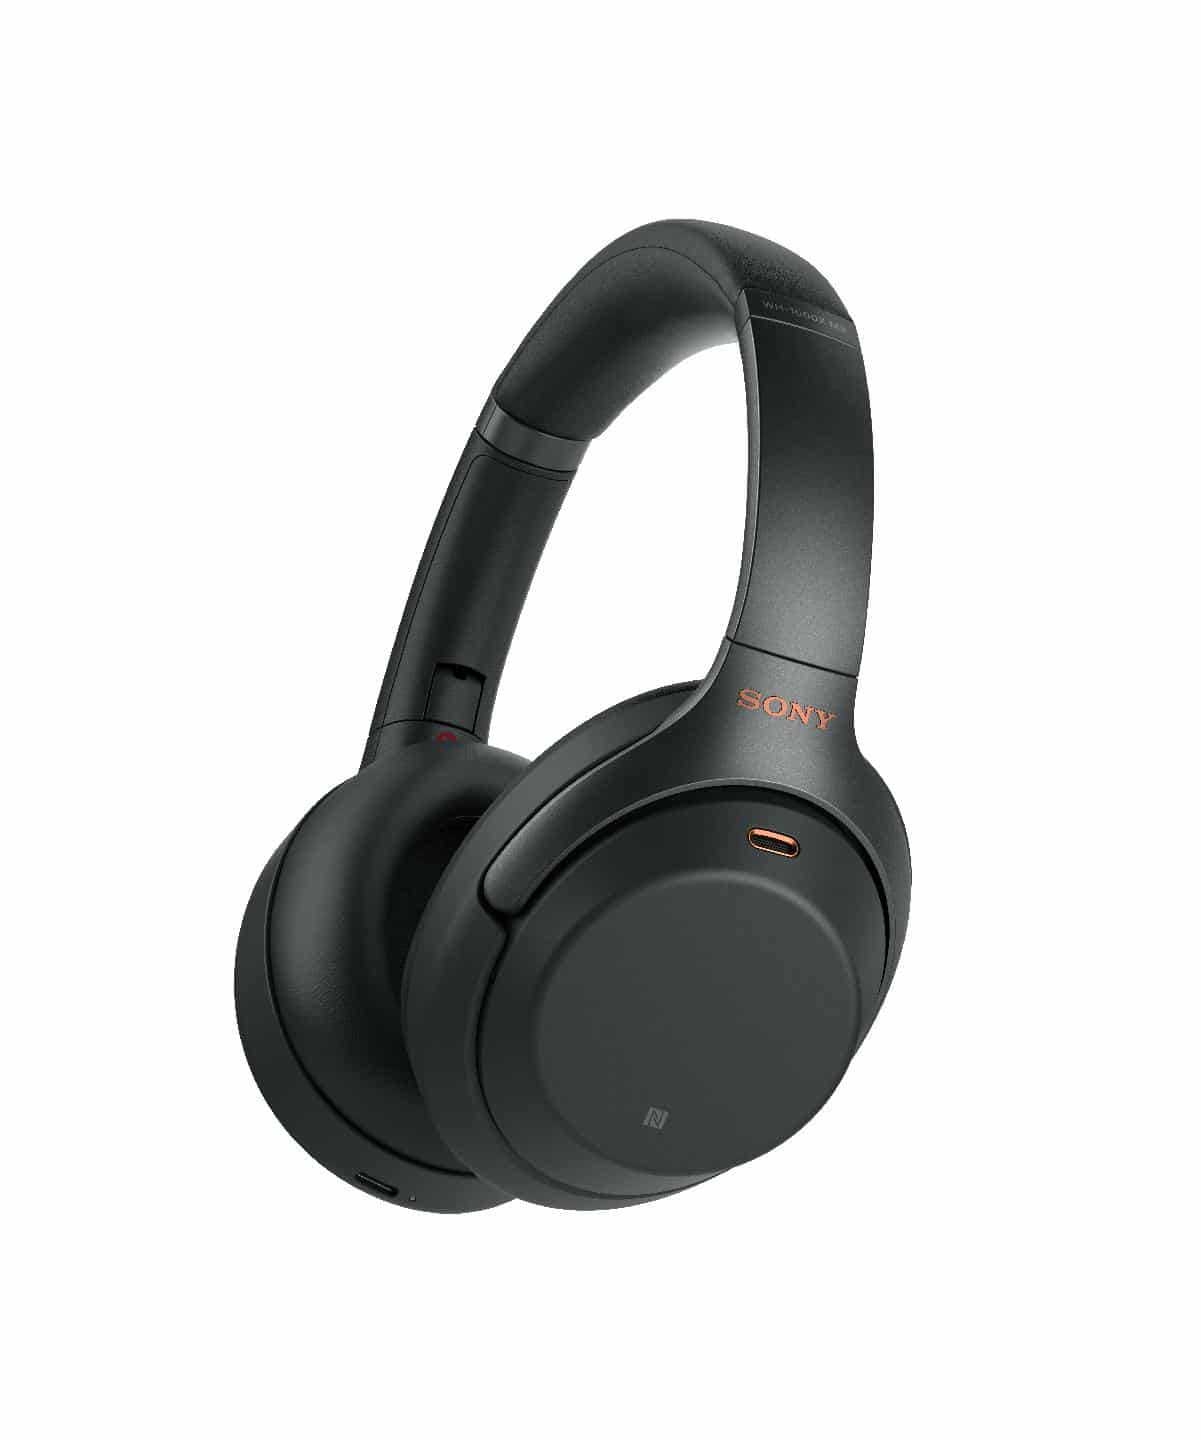 Sony introduces next-level Noise Cancellation with the WH-1000XM3 headphones in the UAE